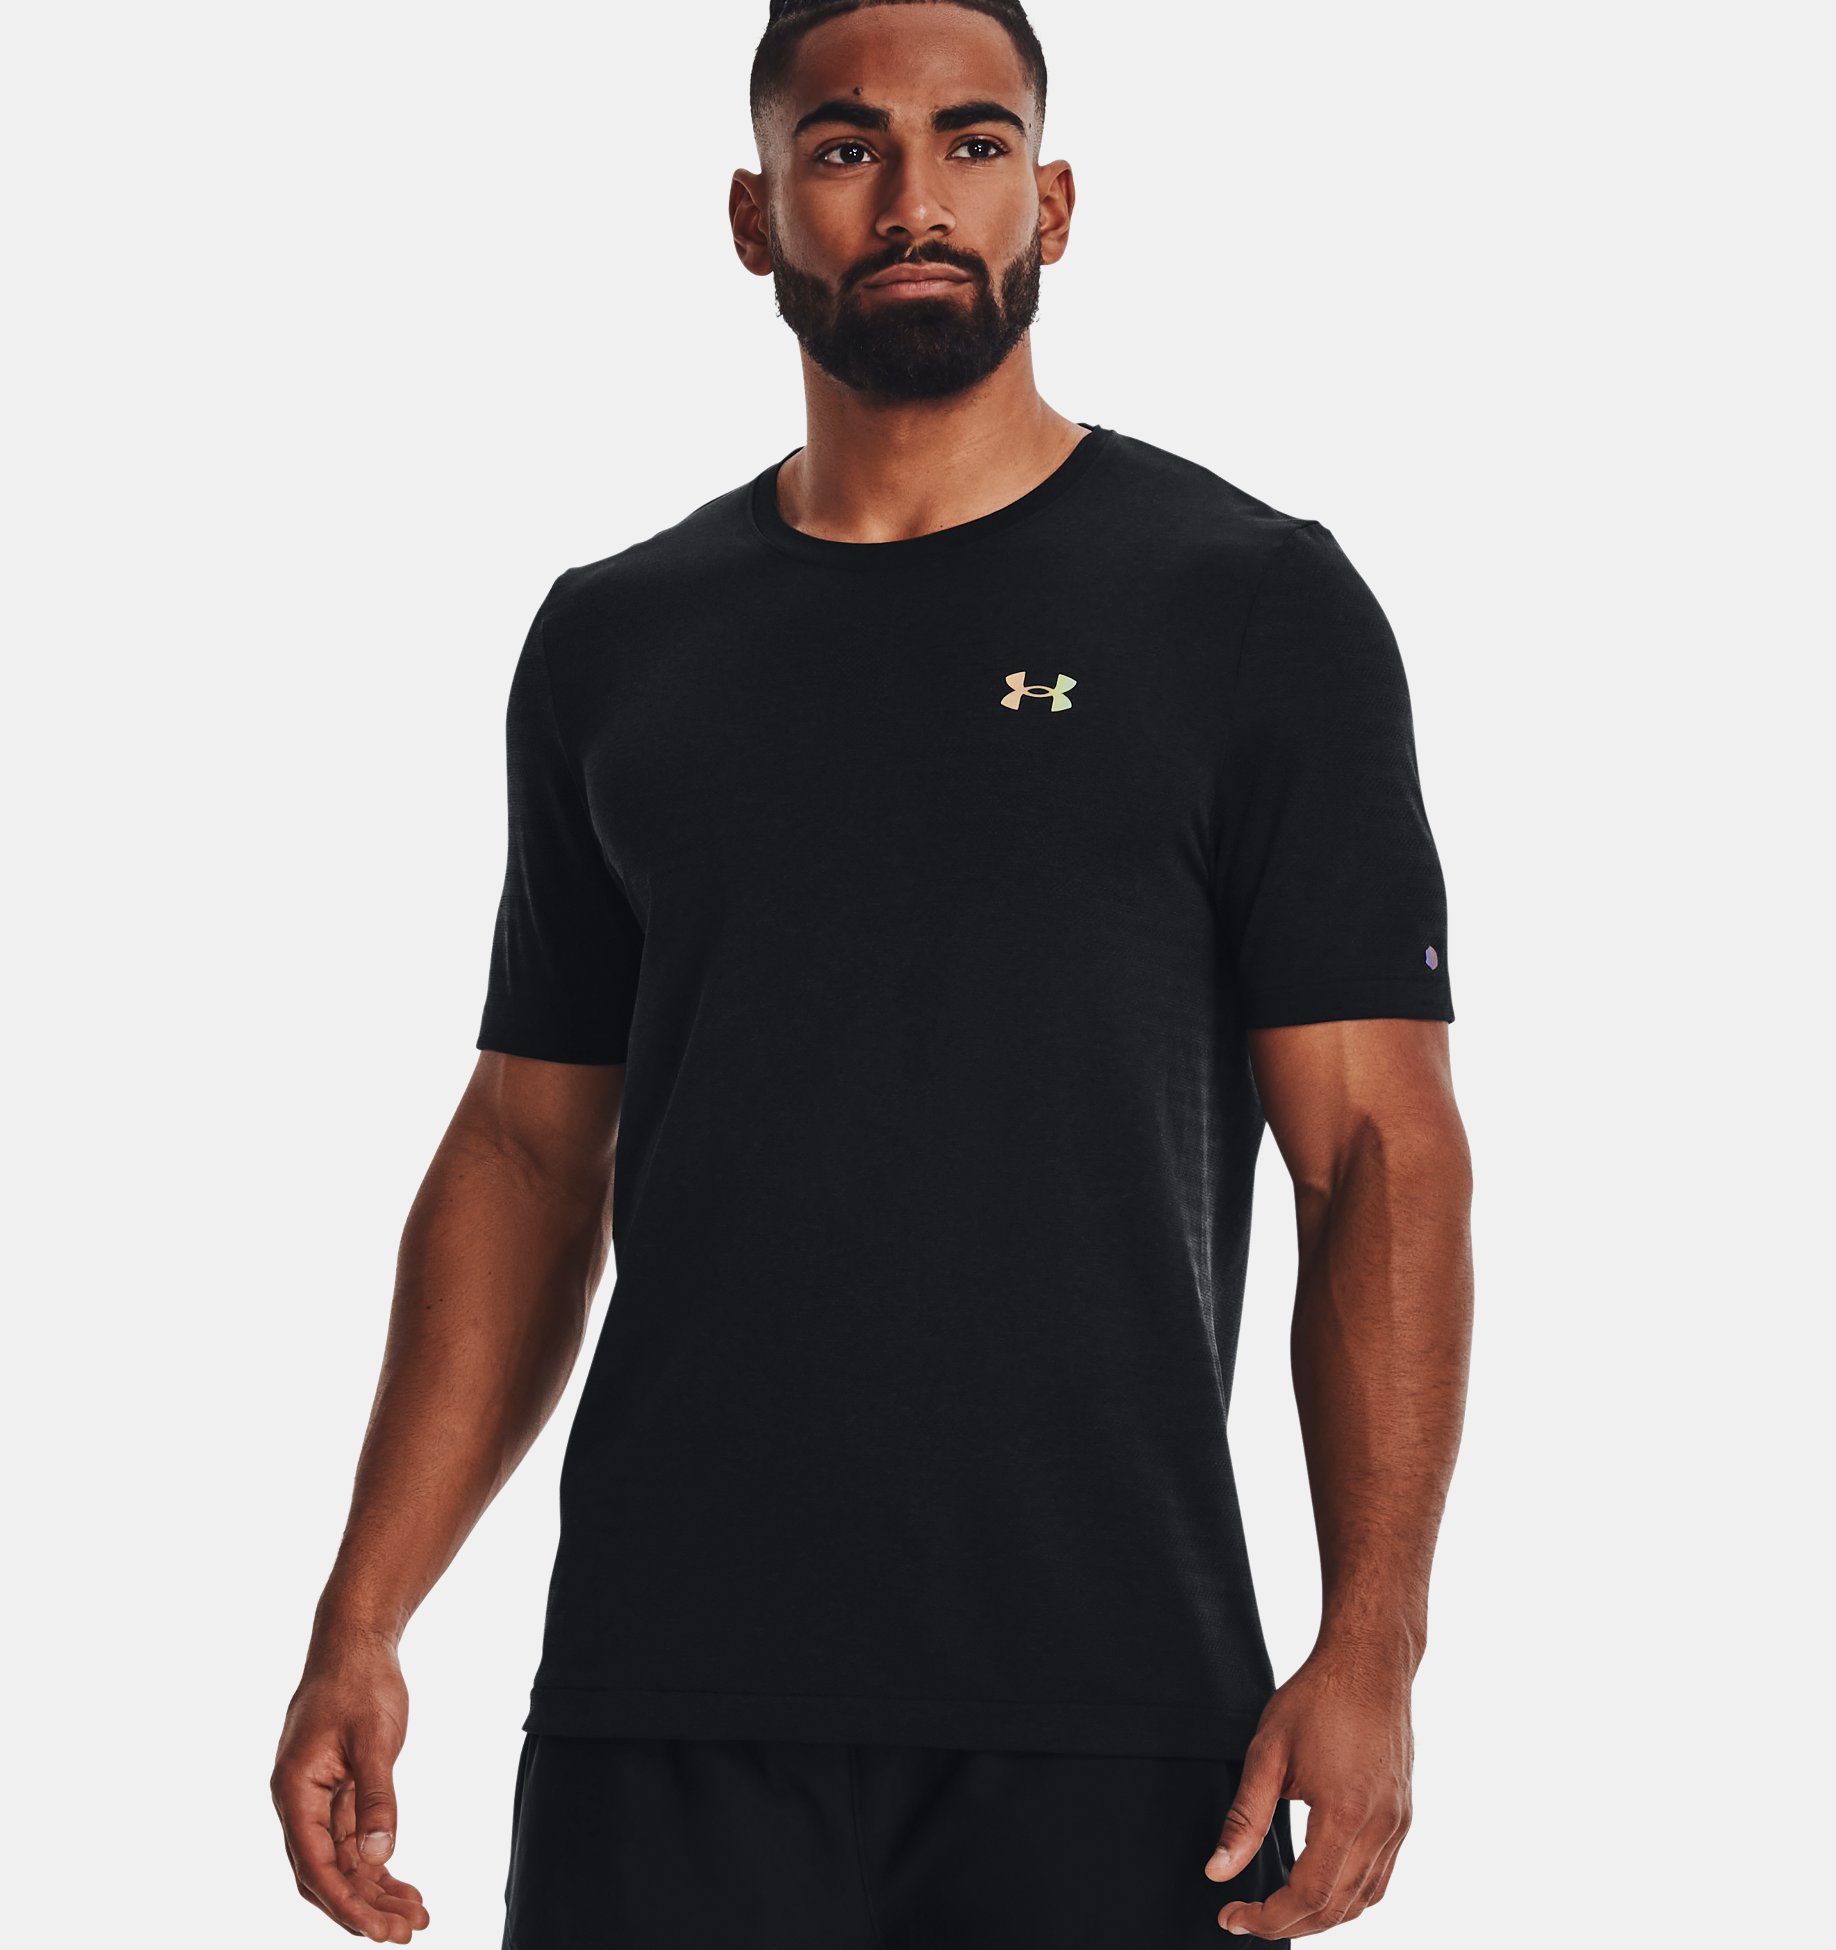 https://underarmour.scene7.com/is/image/Underarmour/V5-1370441-001_FC?rp=standard-0pad|pdpZoomDesktop&scl=0.72&fmt=jpg&qlt=85&resMode=sharp2&cache=on,on&bgc=f0f0f0&wid=1836&hei=1950&size=1500,1500